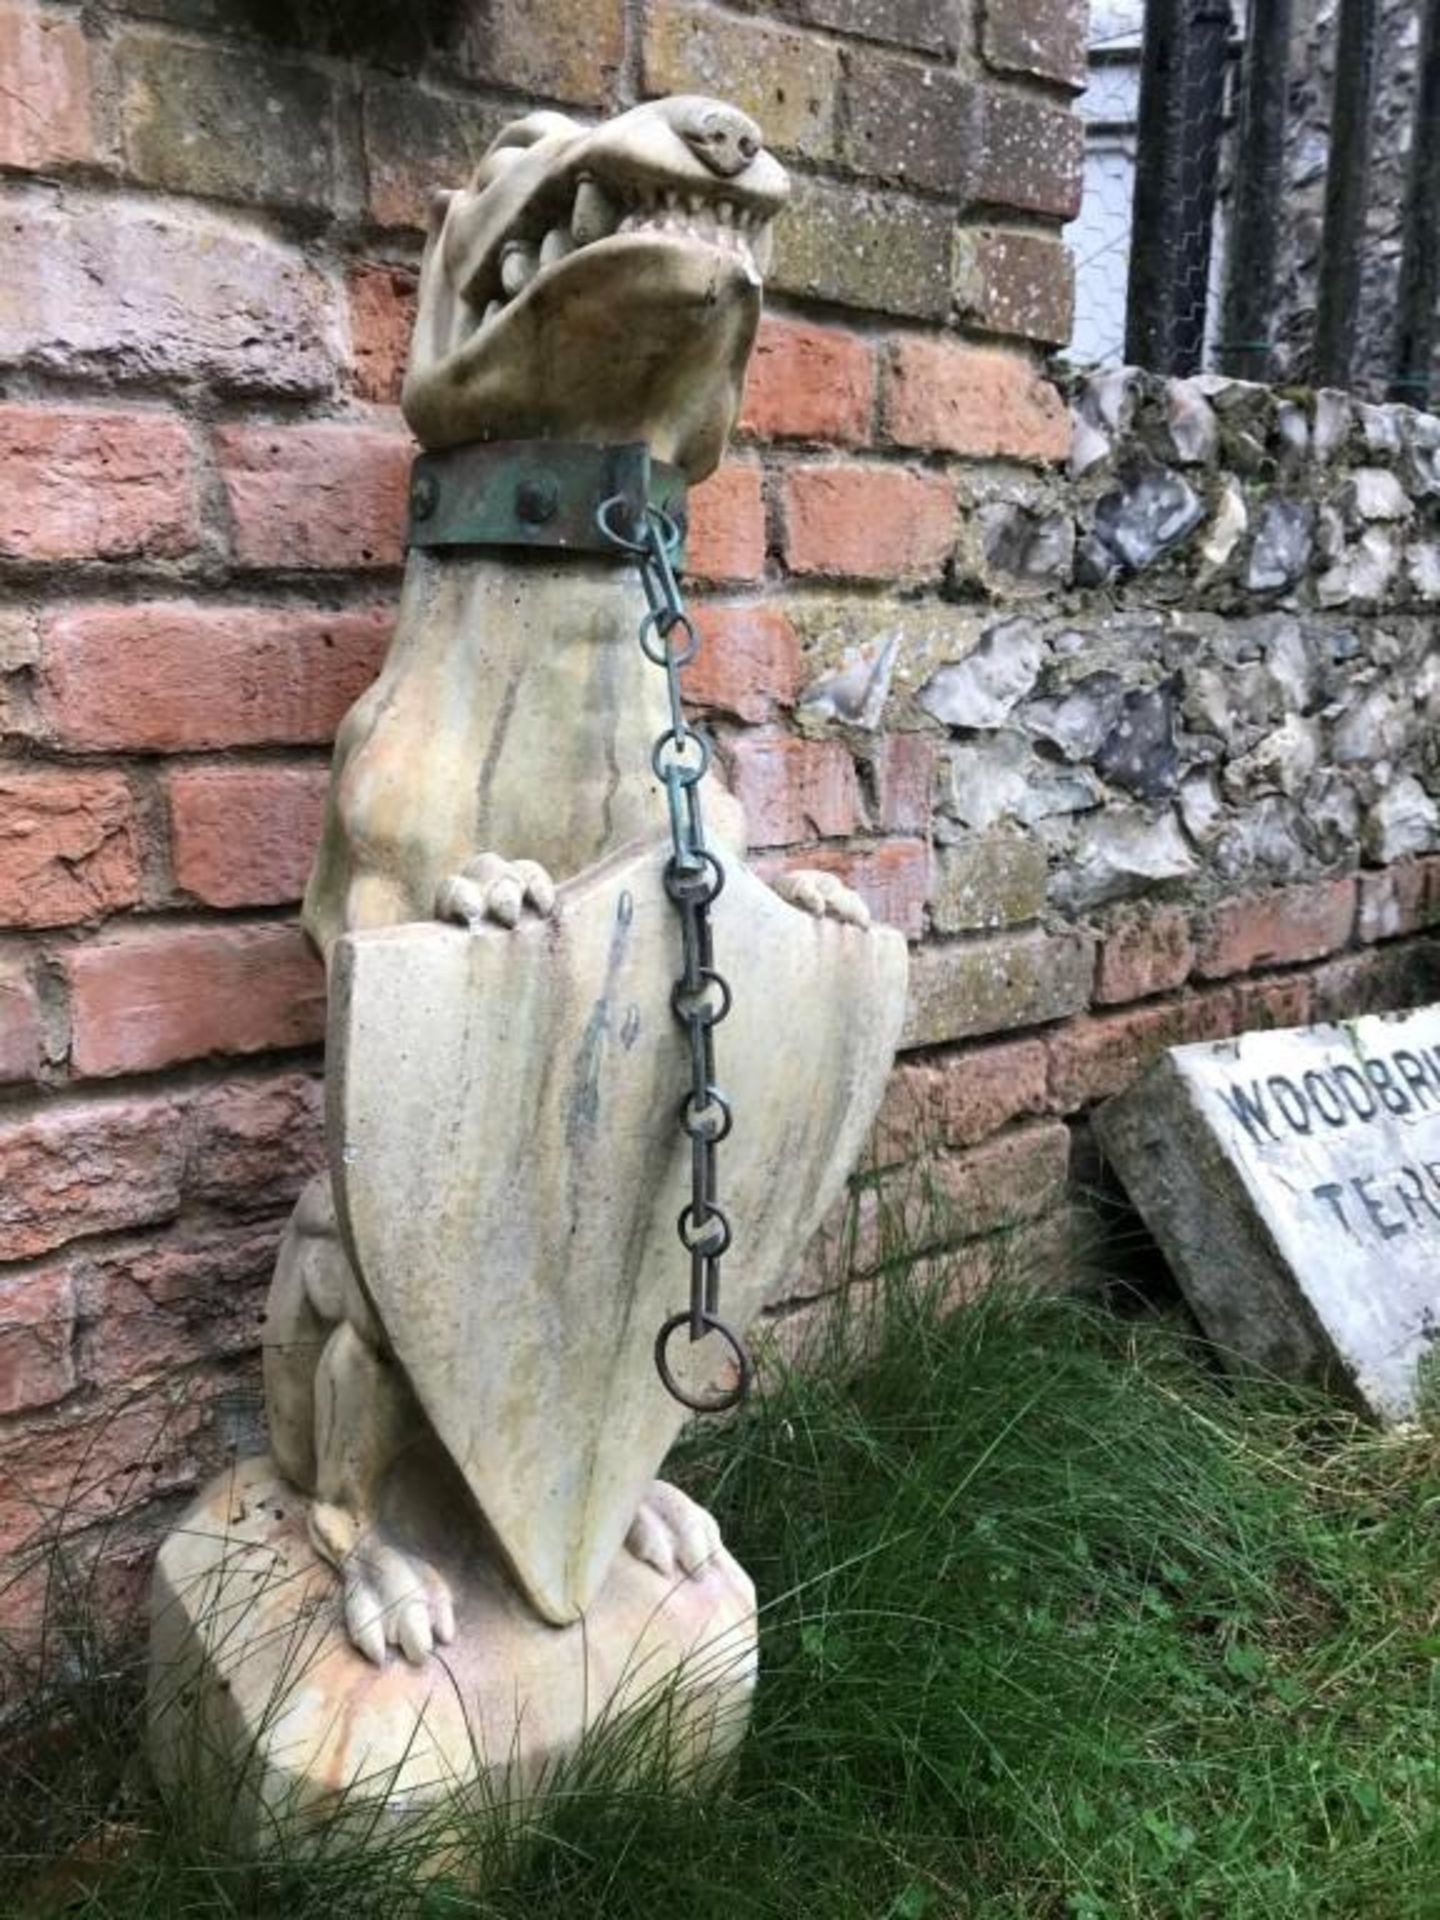 1 x Tall Gothic Style Guard Dog Statue Holding Shield with Metal Dog Colllar and Chain Lead - - Image 2 of 7